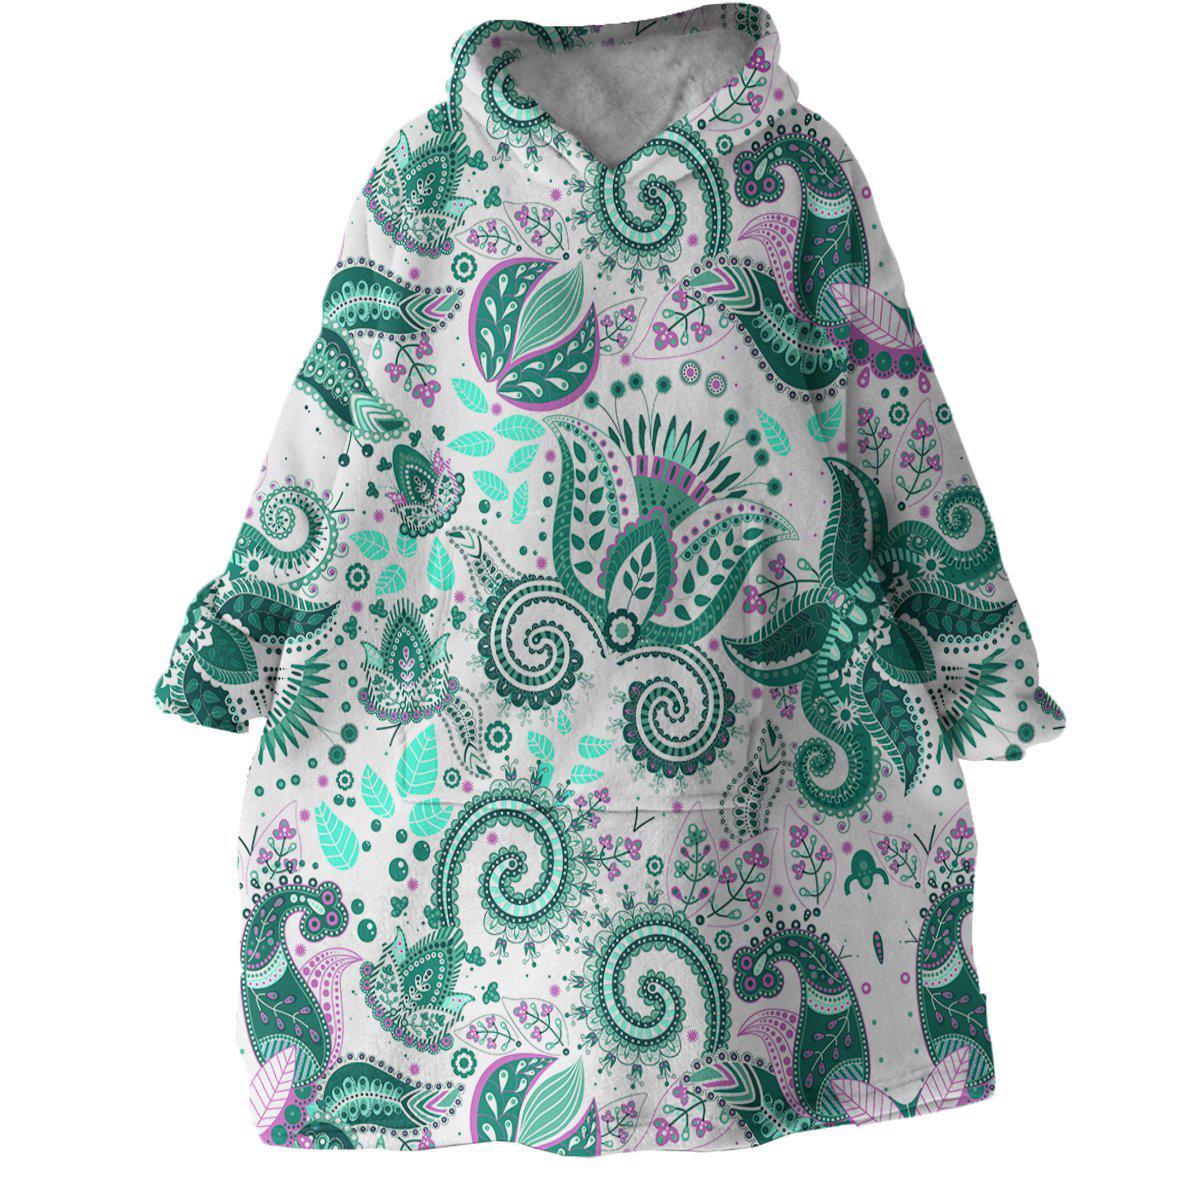 Wearable Blanket Hoodie - Moonlight Magic by Coastal Passion